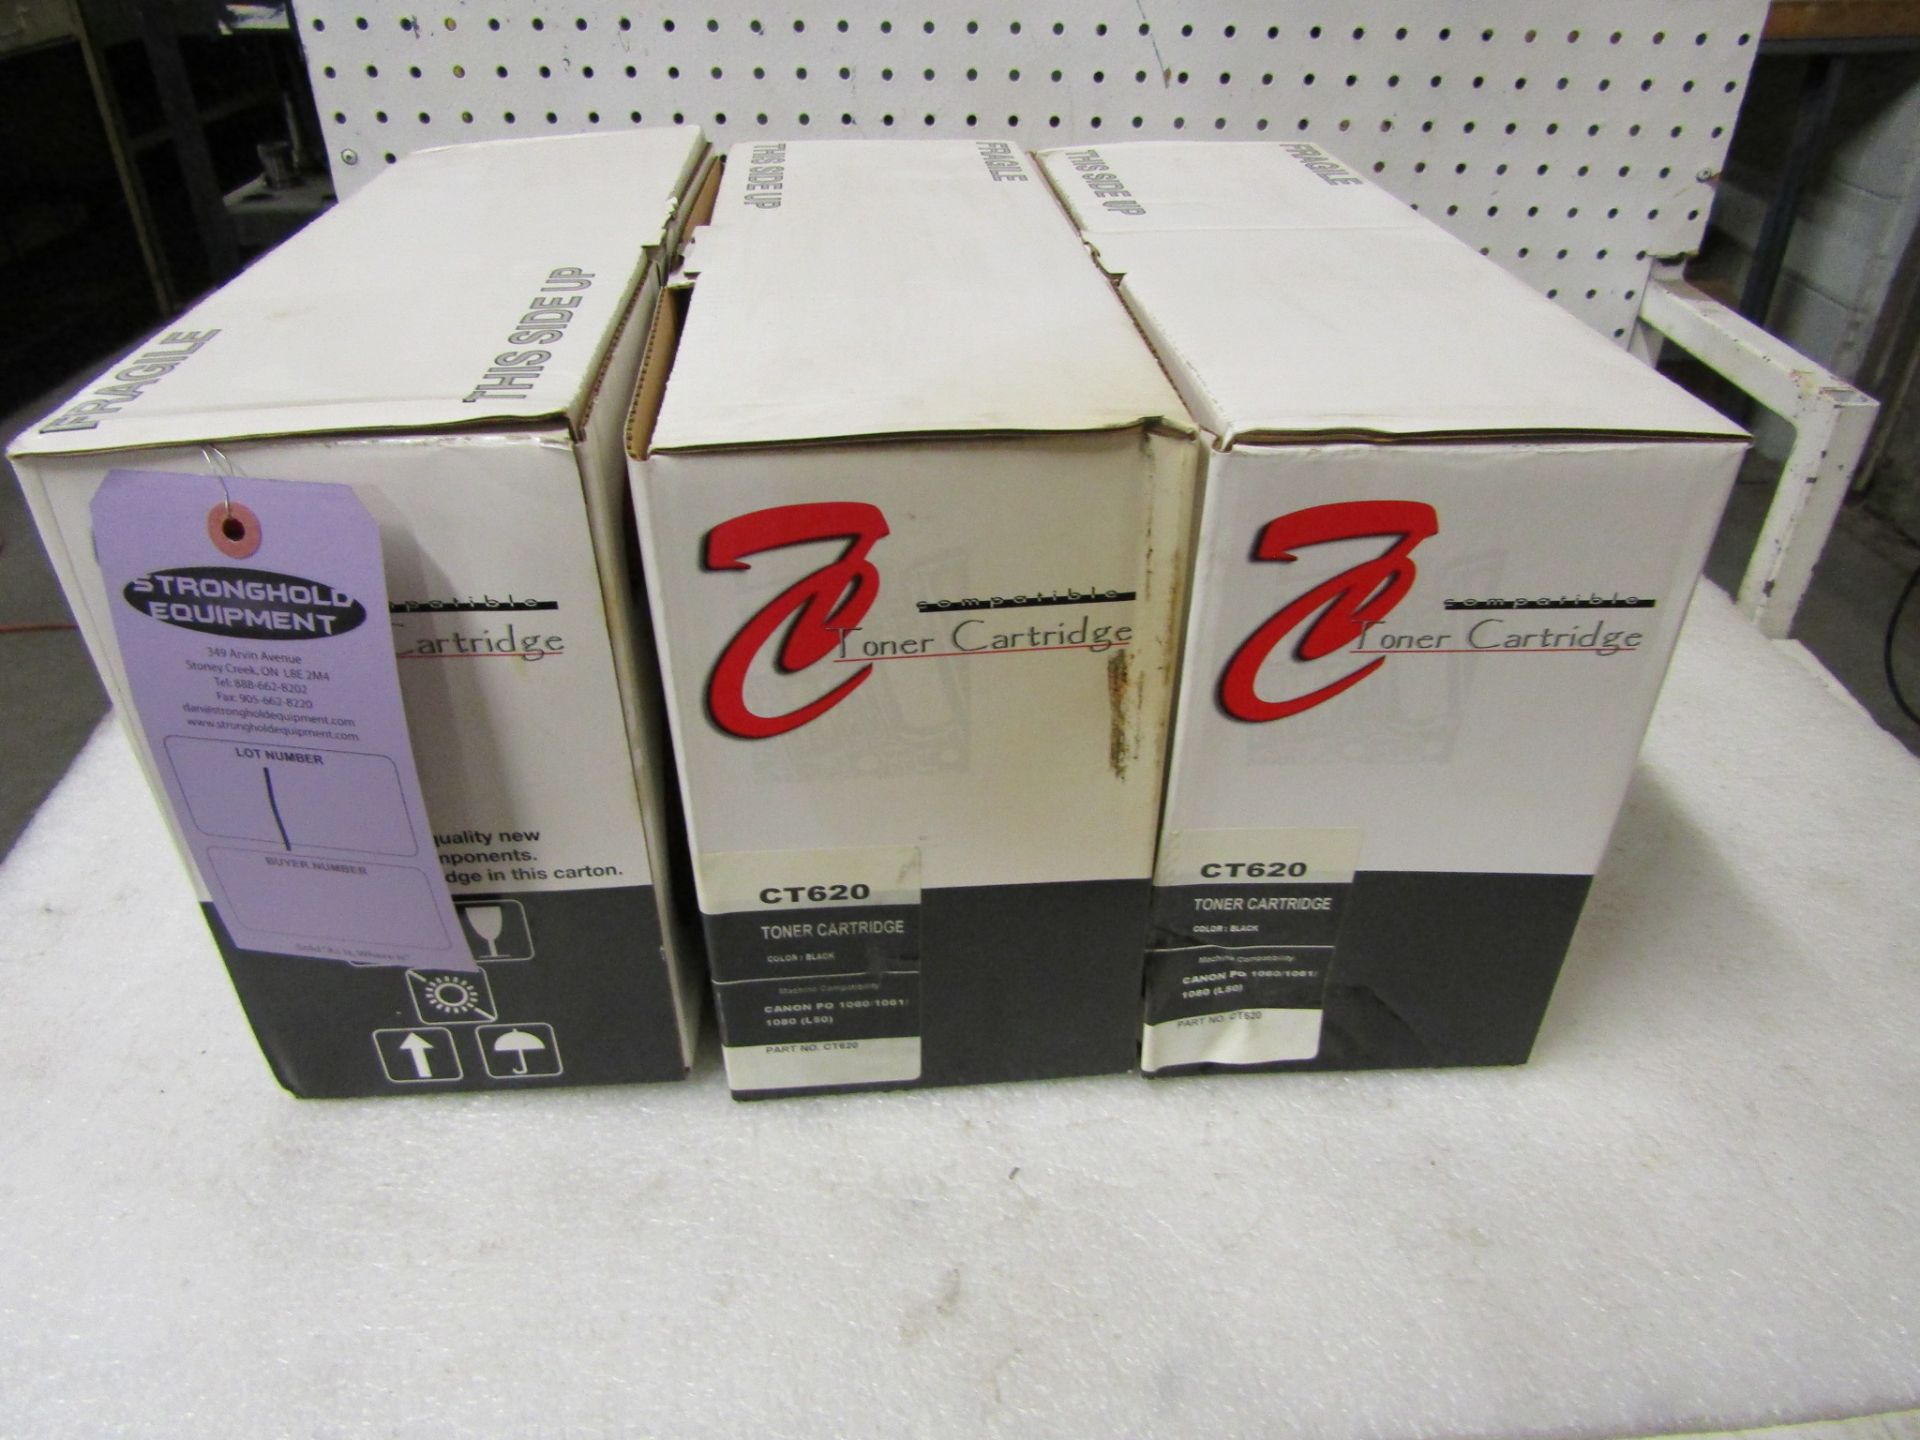 Lot of 3 (3 units) Canon CT620 Ink Cartridges - brand new units